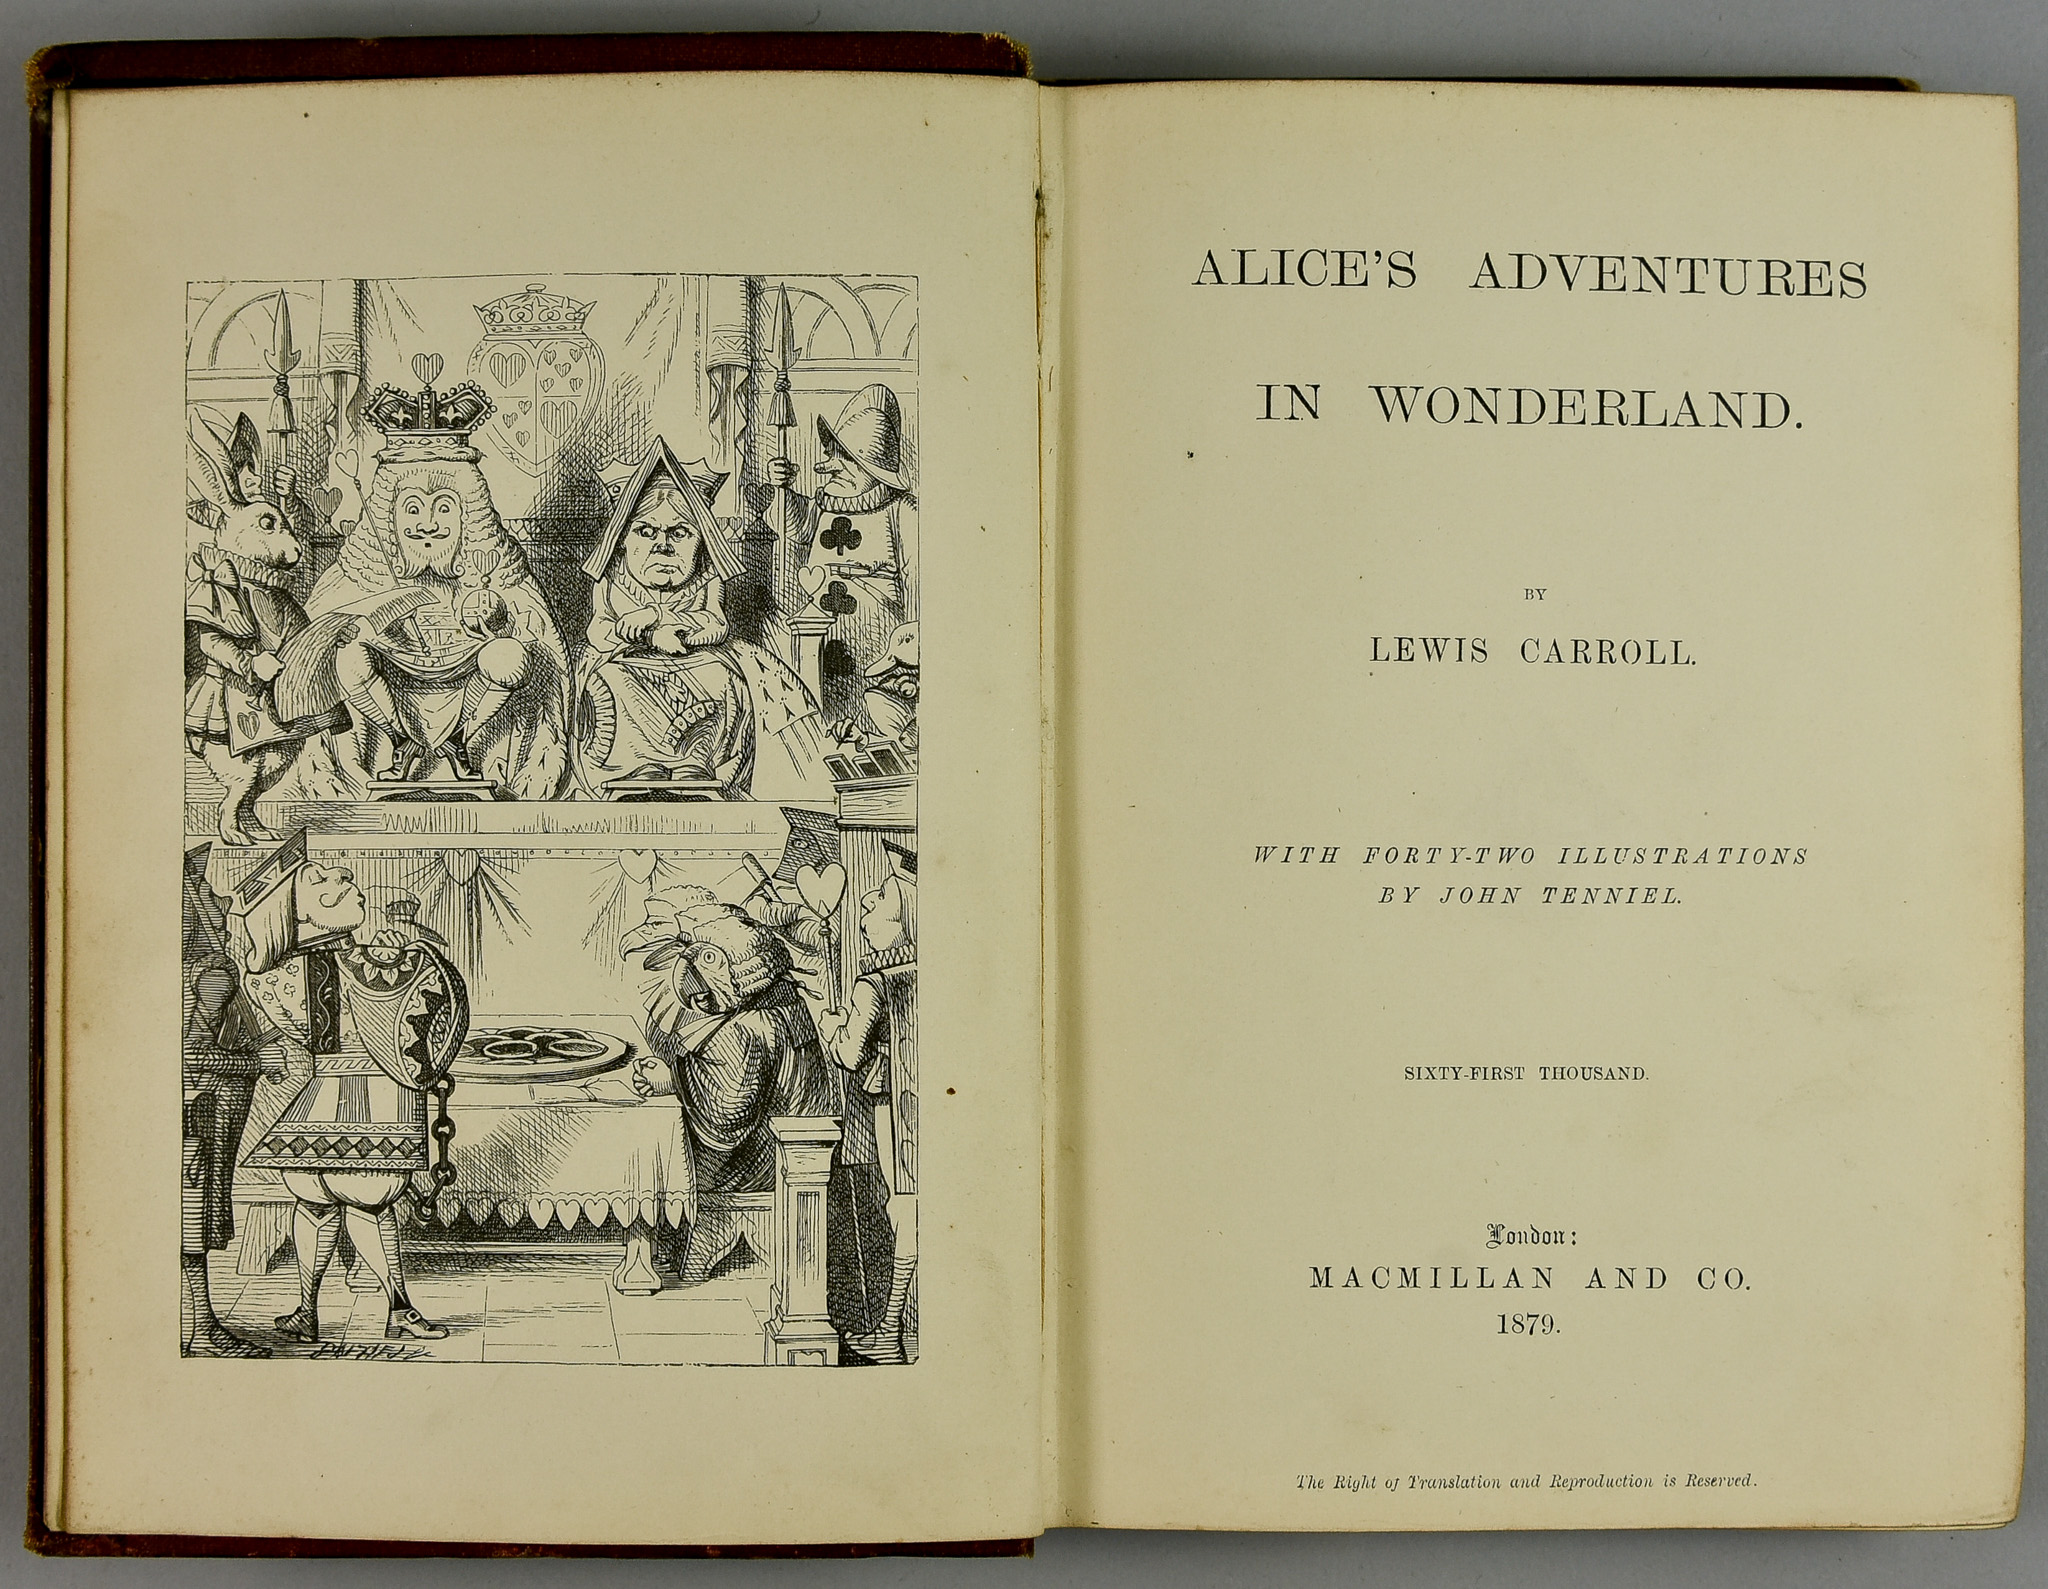 Lewis Carroll - "Alice's Adventures in Wonderland", "With Forty-Two Illustrations by John